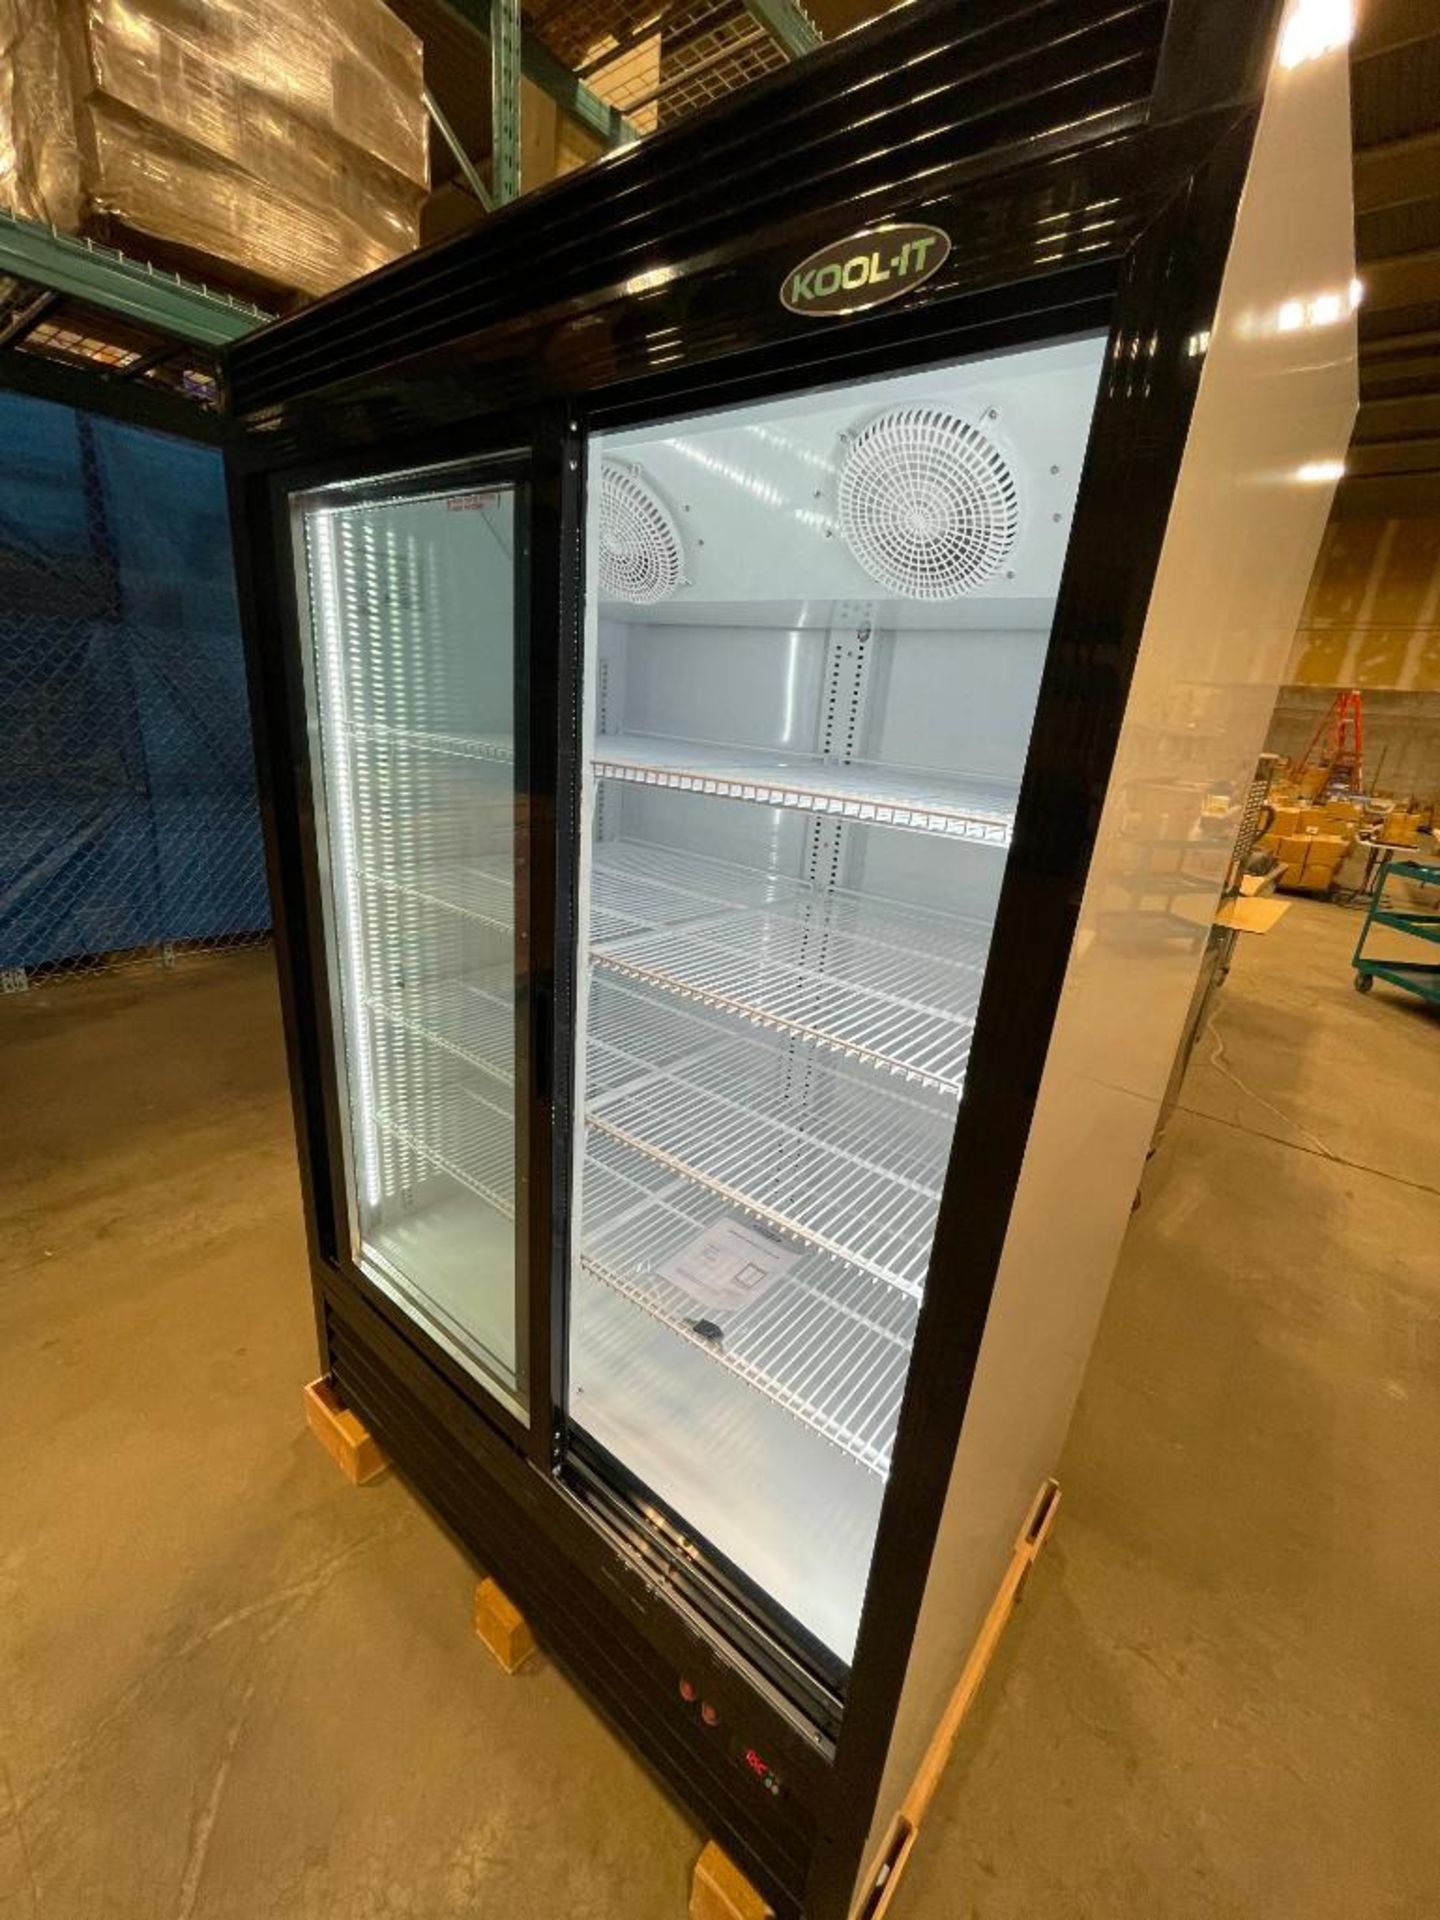 DOUBLE SLIDING GLASS DOOR COOLER, 33.5 CU. FT, LED DISPLAY - NEW - Image 3 of 12